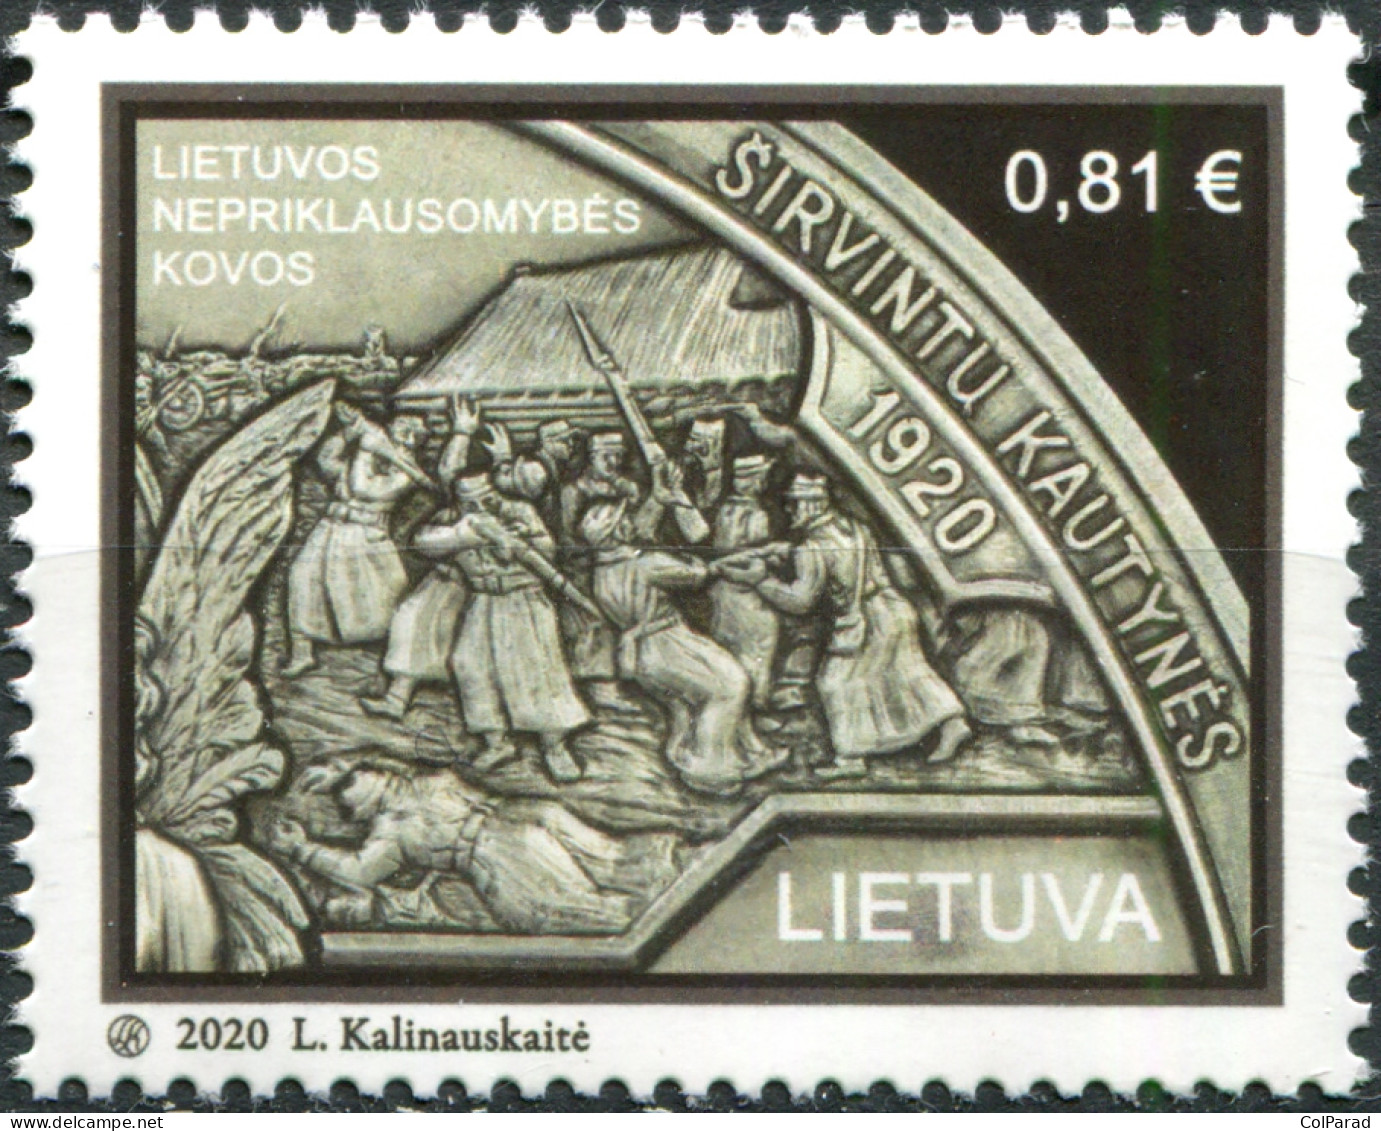 LITHUANIA - 2020 - STAMP MNH ** - Centenary Of Wars Of Independence - Lithuania